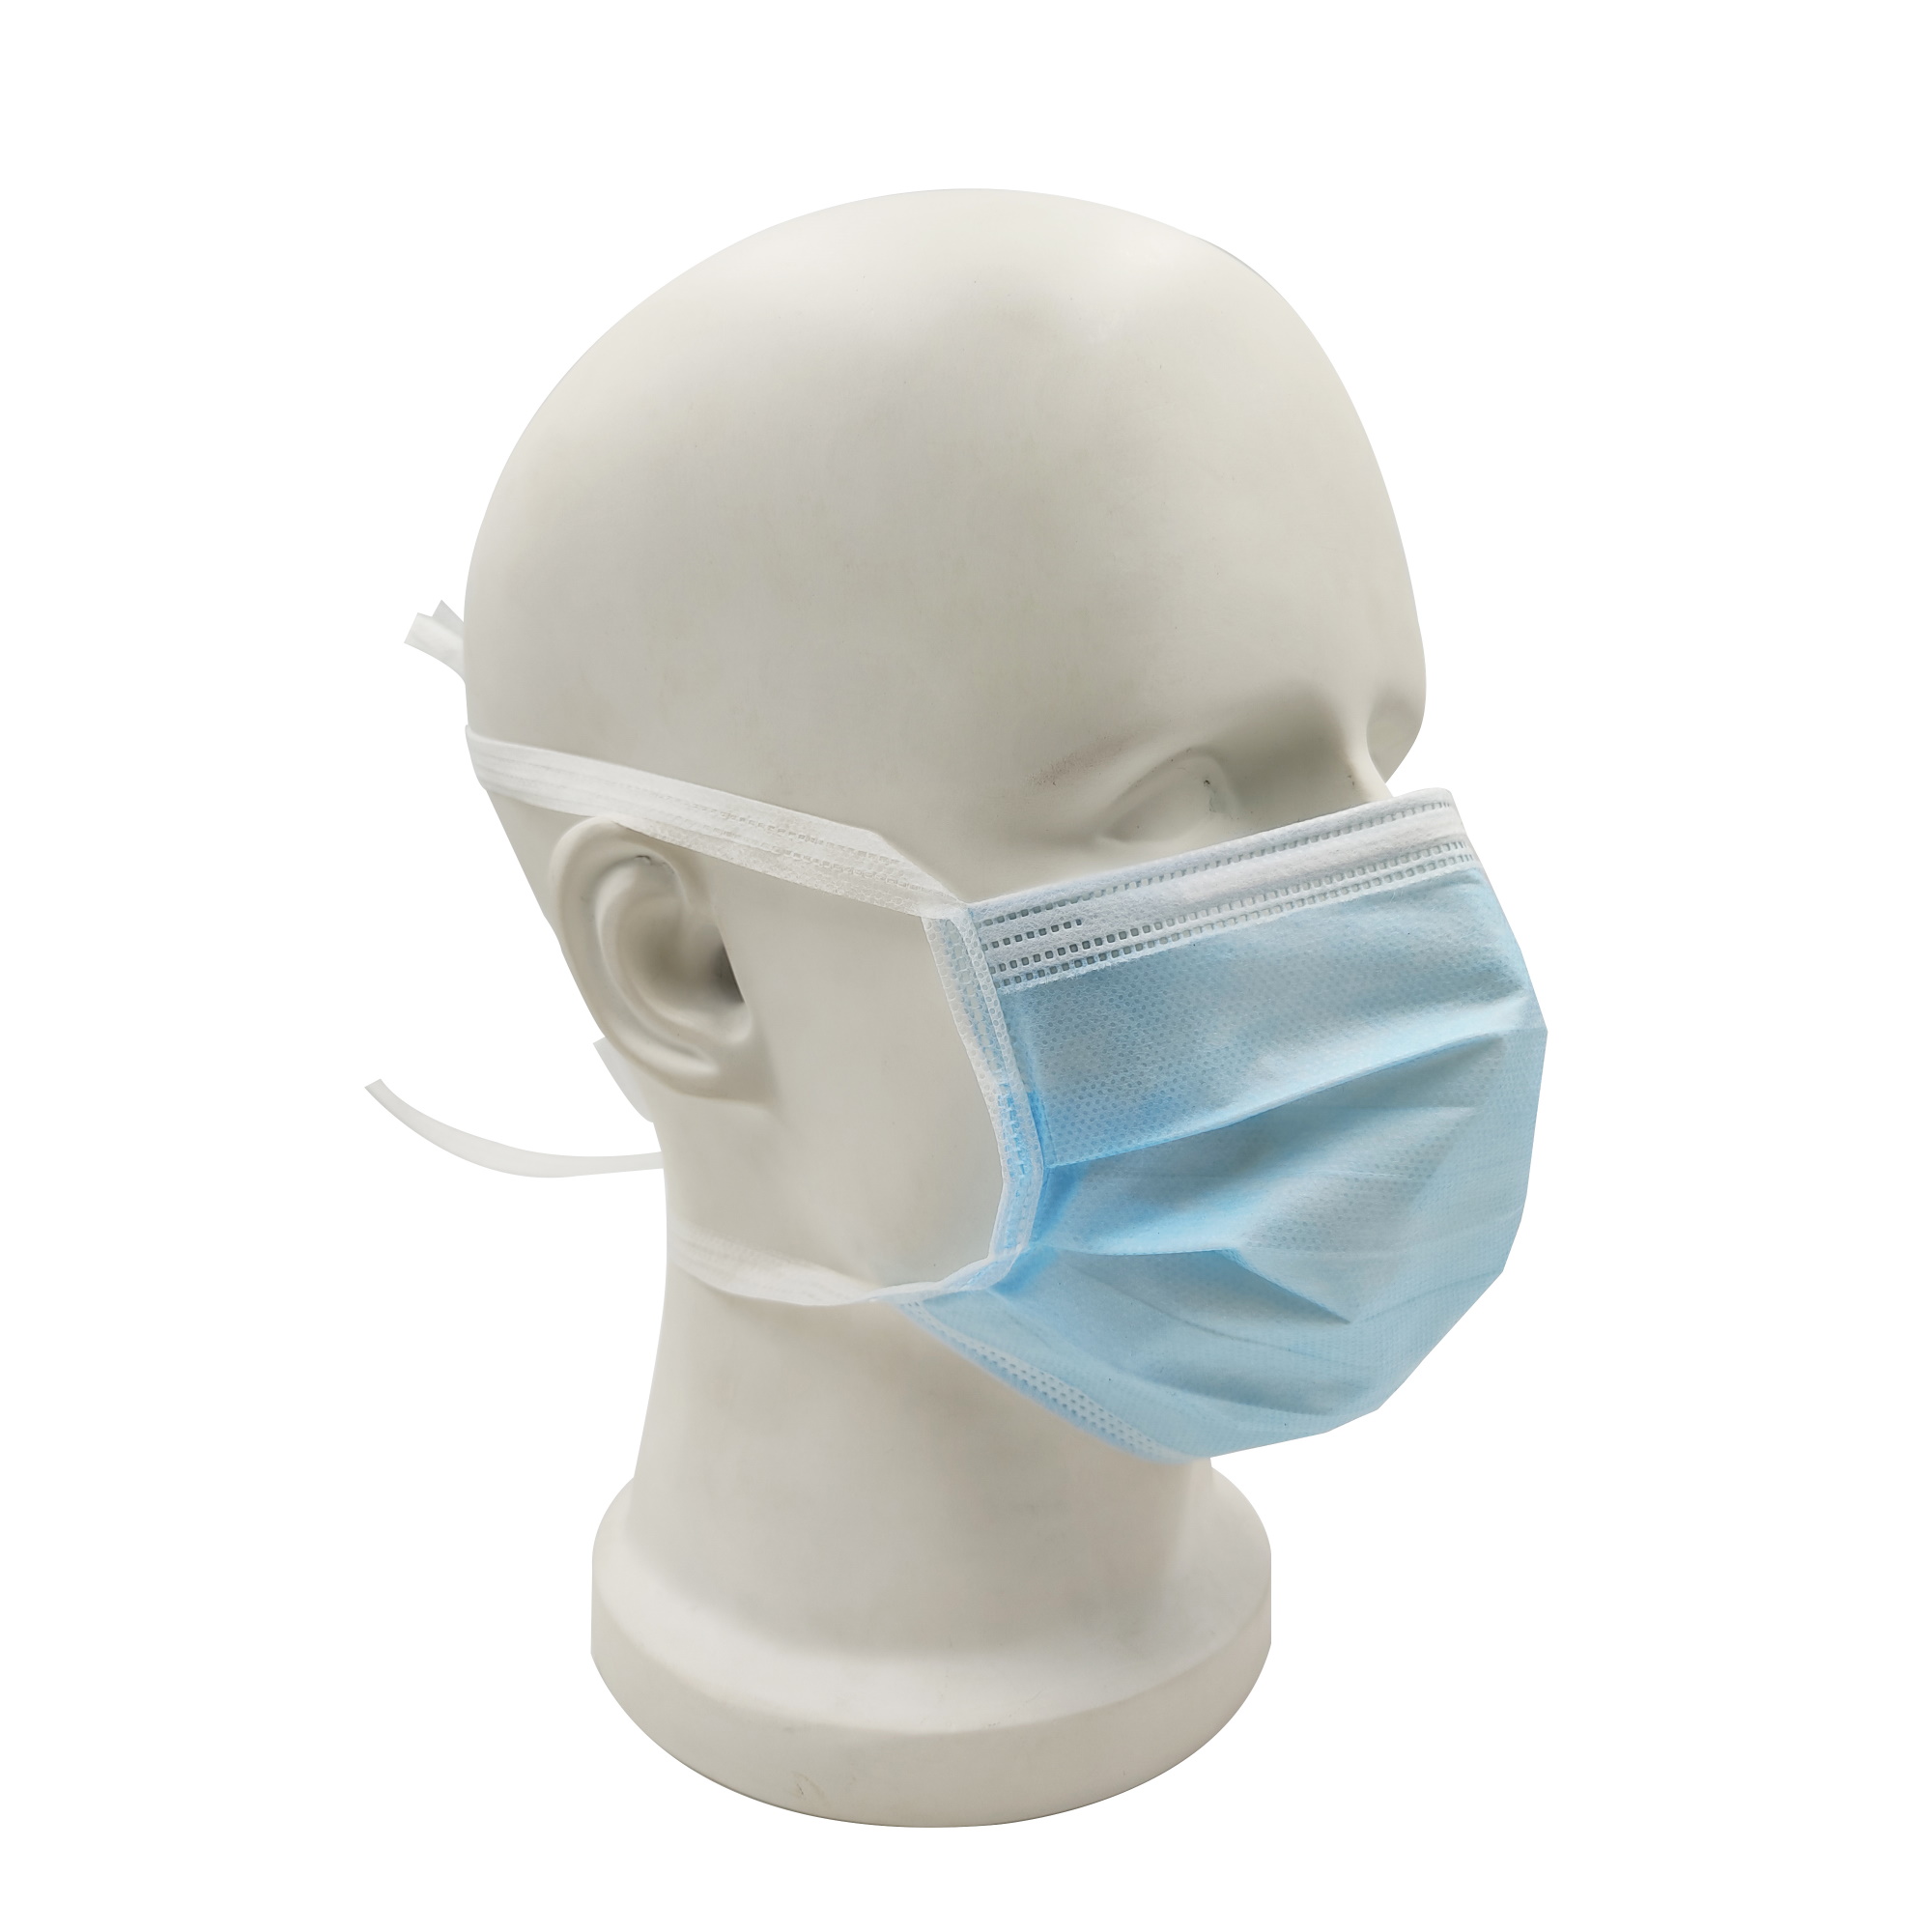 SAFETYWARE Medical Face Mask (Tie On) - Safetyware Sdn Bhd